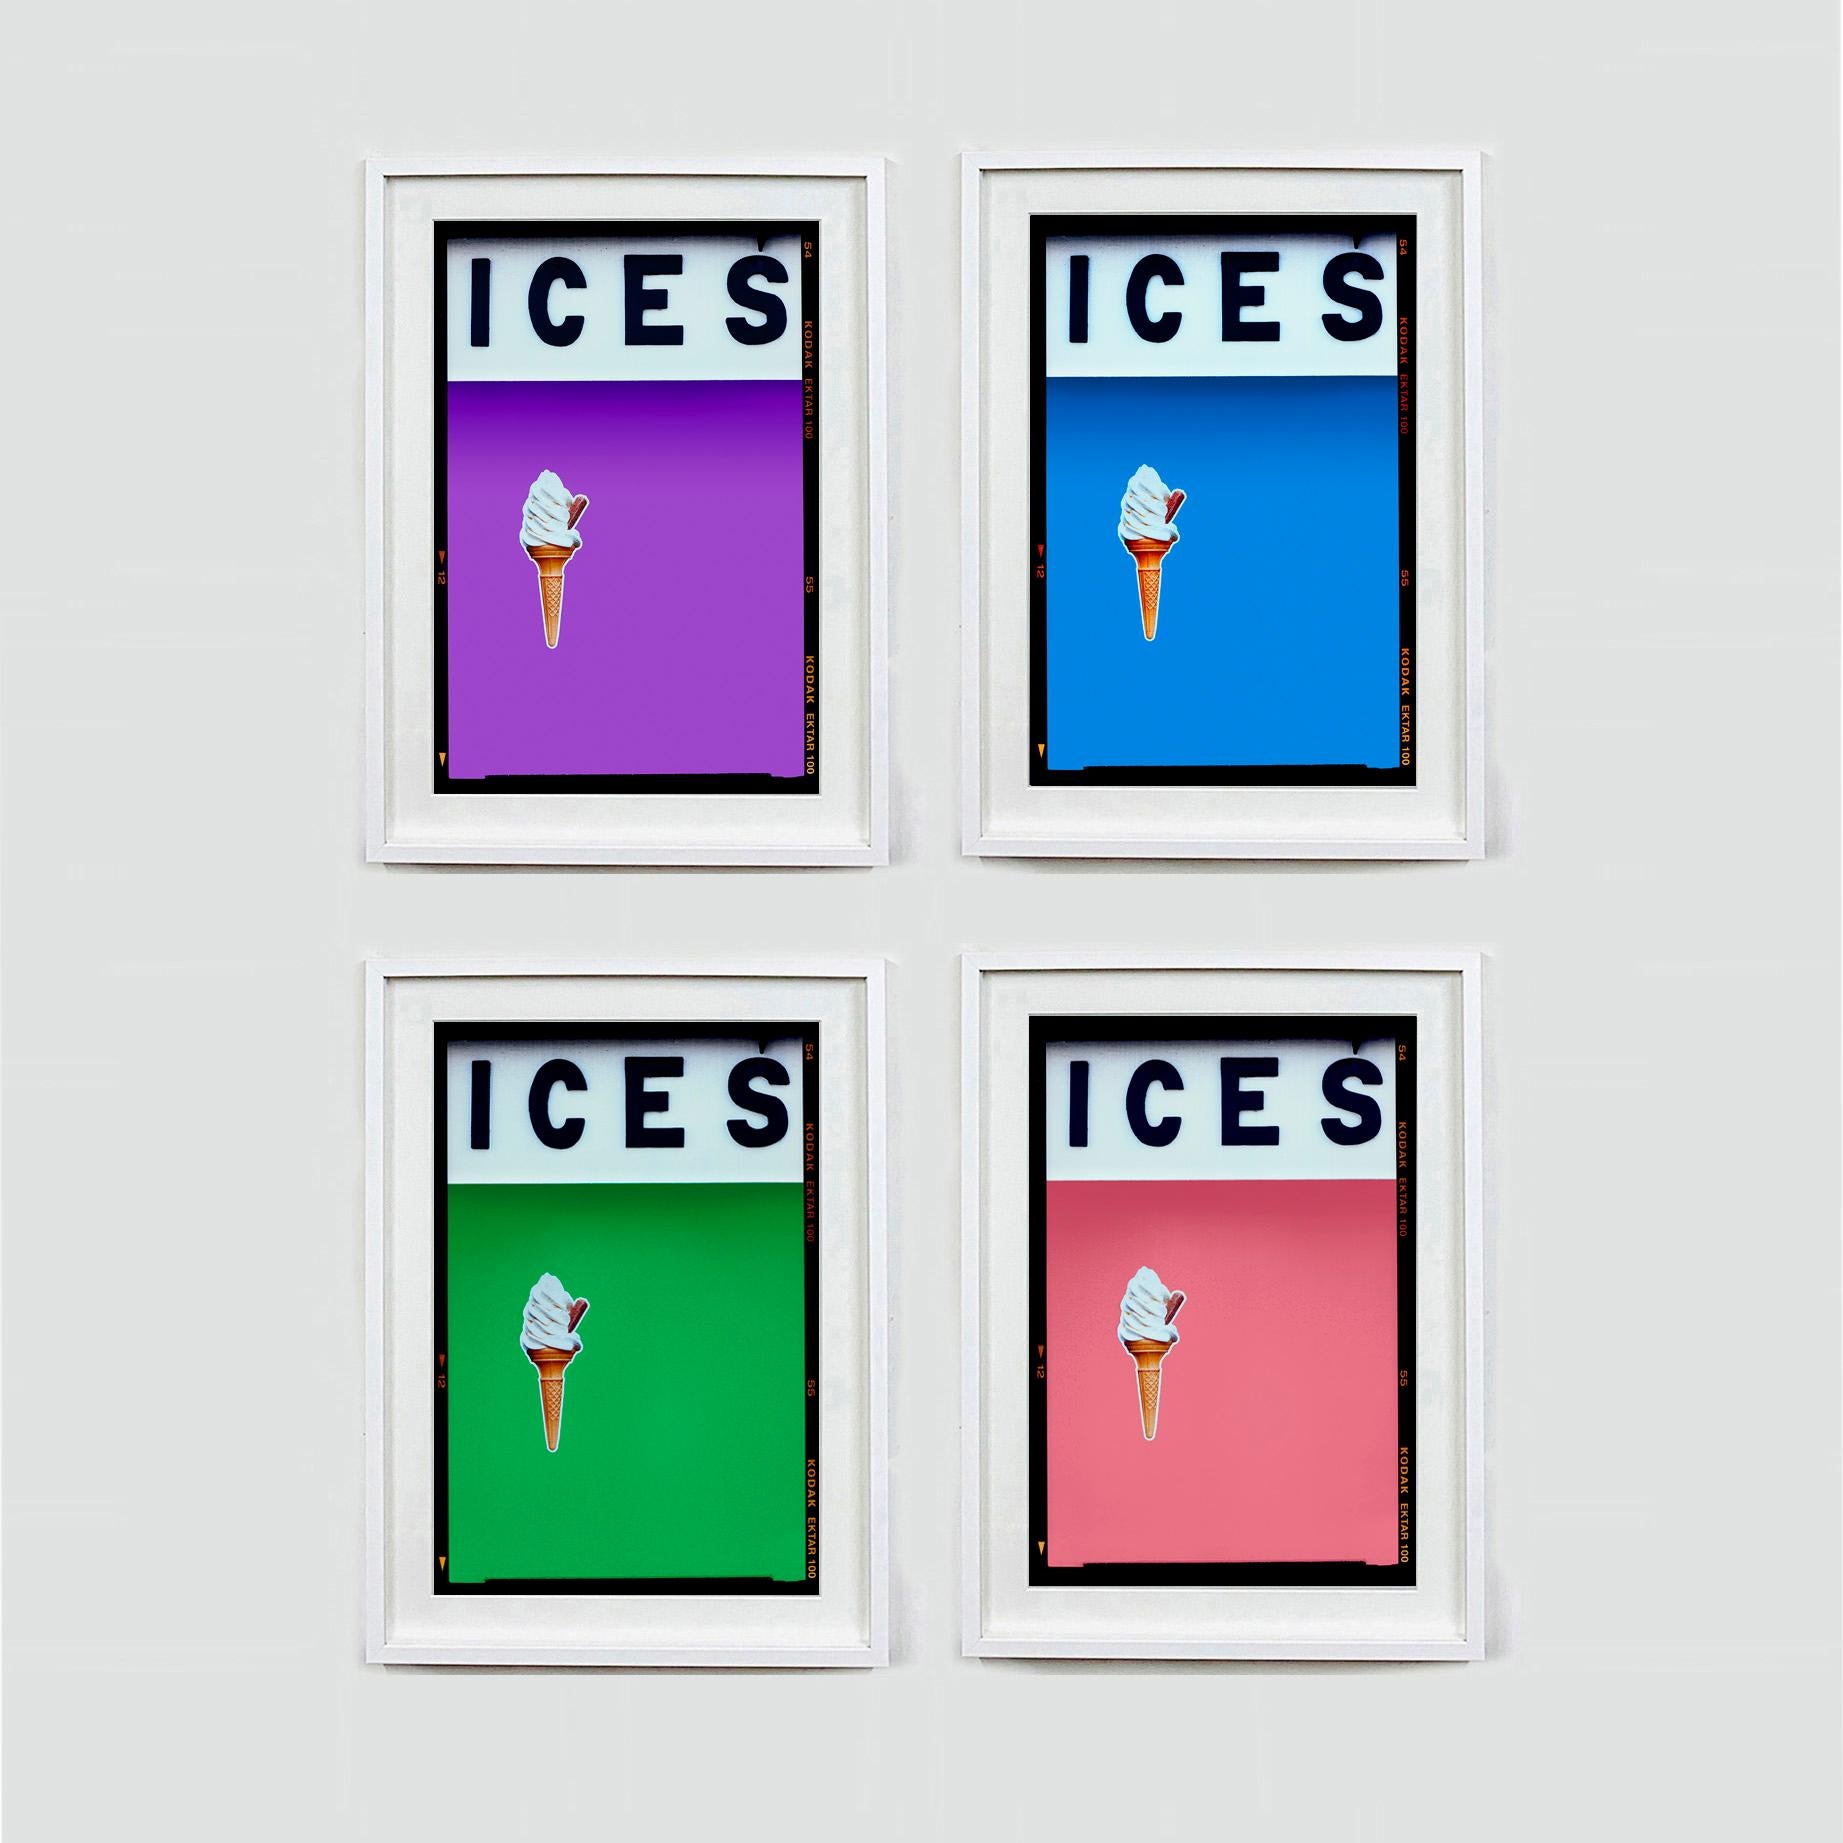 ICES, by Richard Heeps, photographed at the British Seaside at the end of summer 2020. This artwork is about evoking memories of the simple joy of days by the beach. The lilac purple color blocking, typography and the surreal twist of the suspended